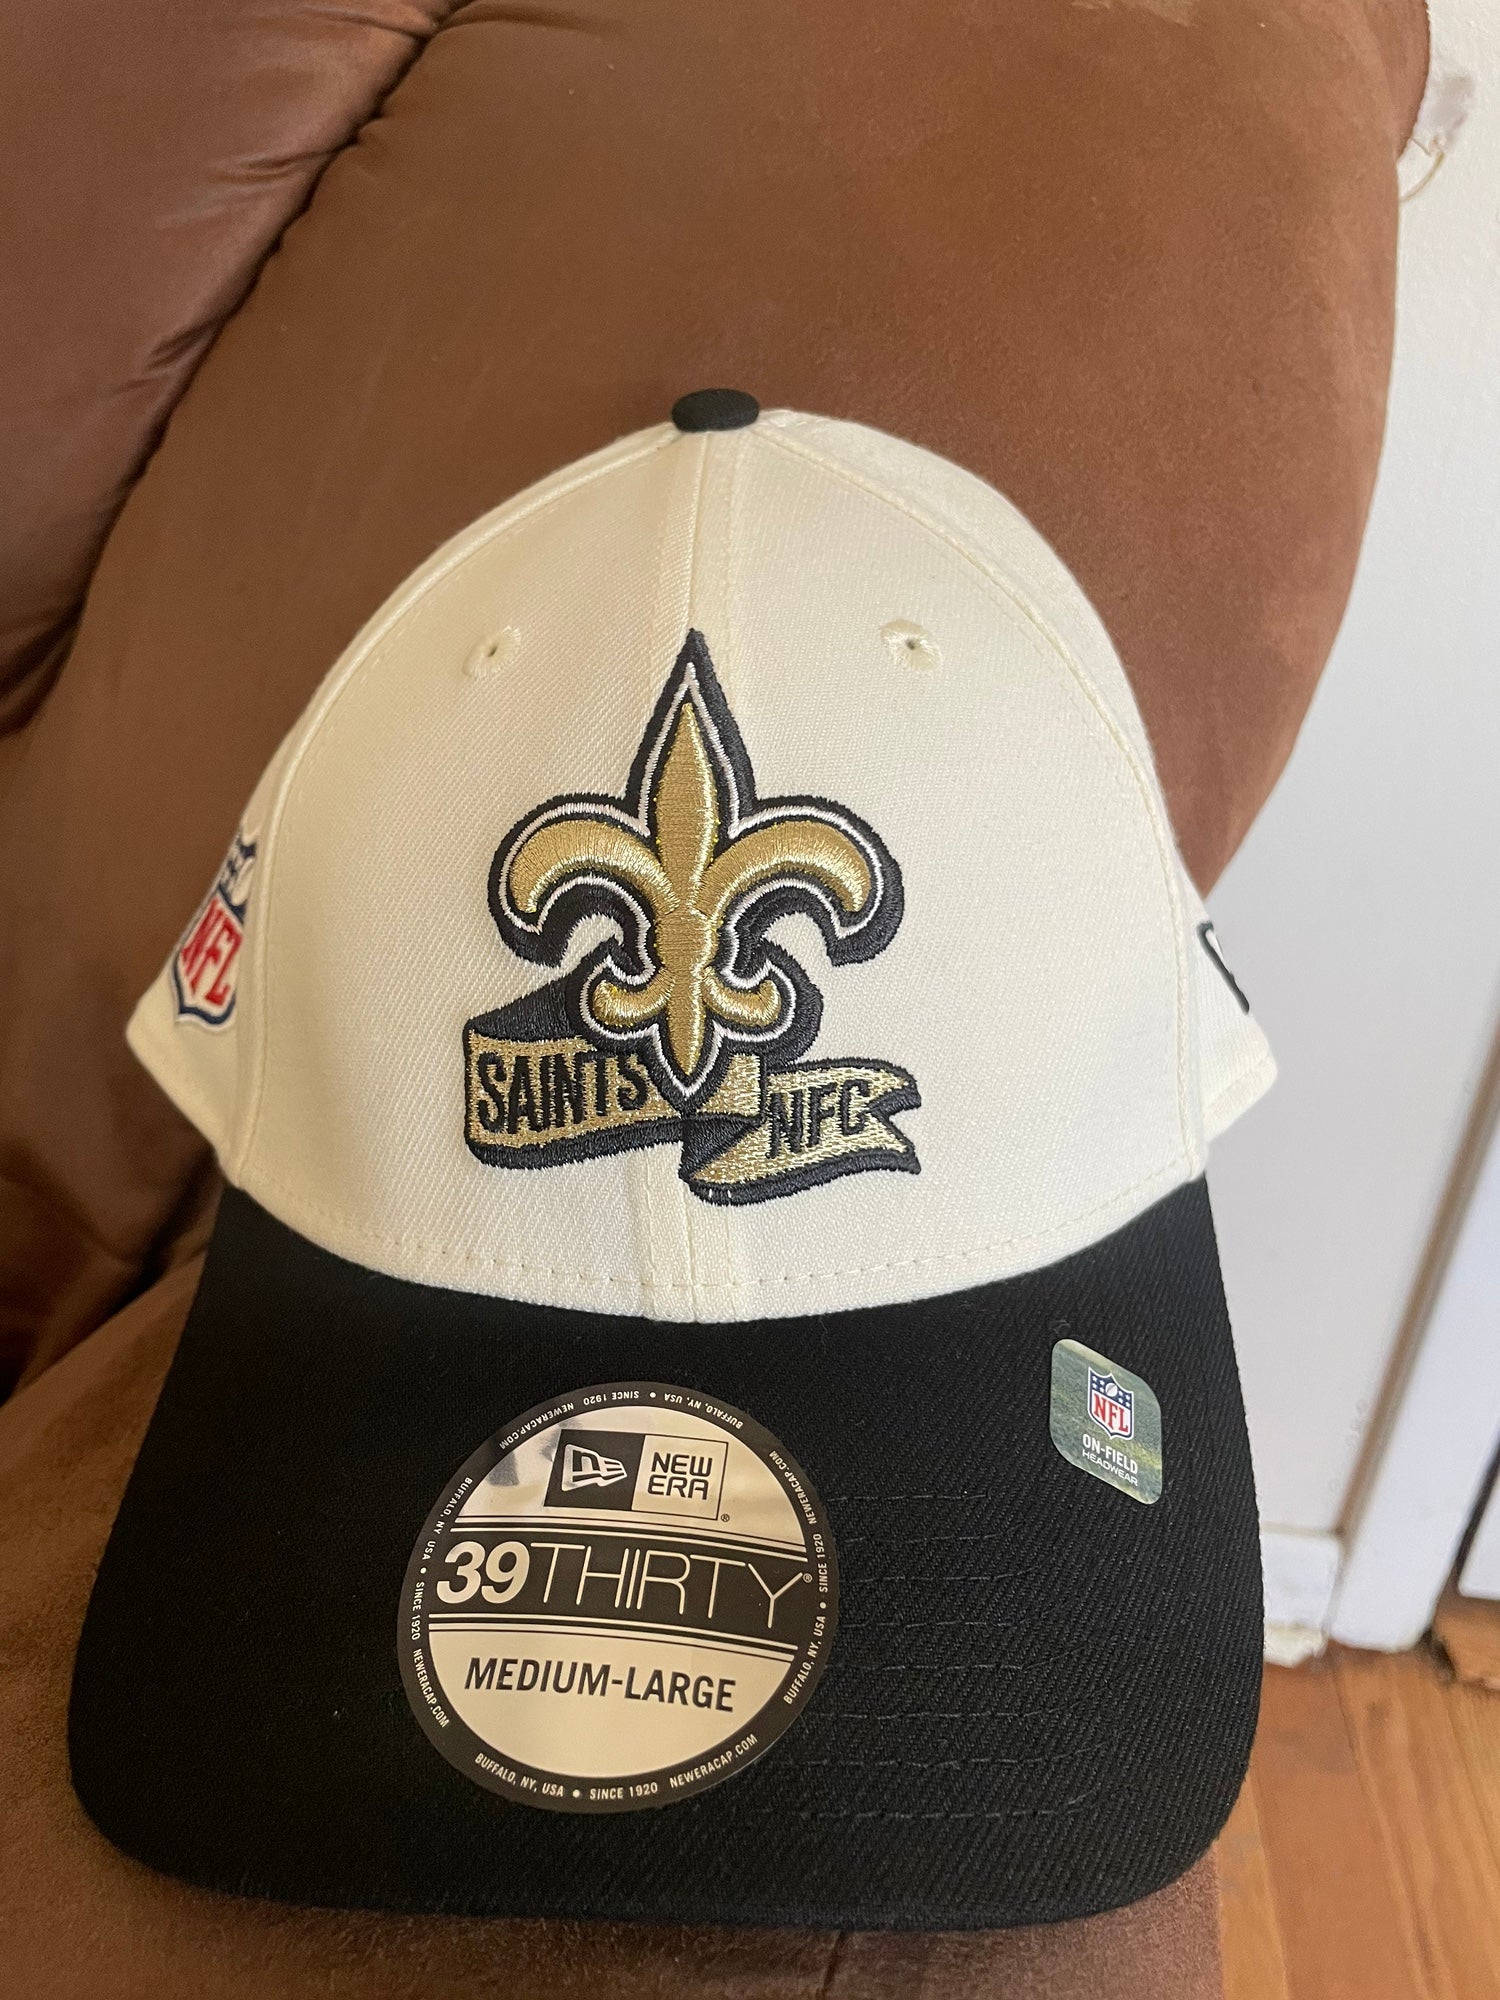 nfl hats for sale